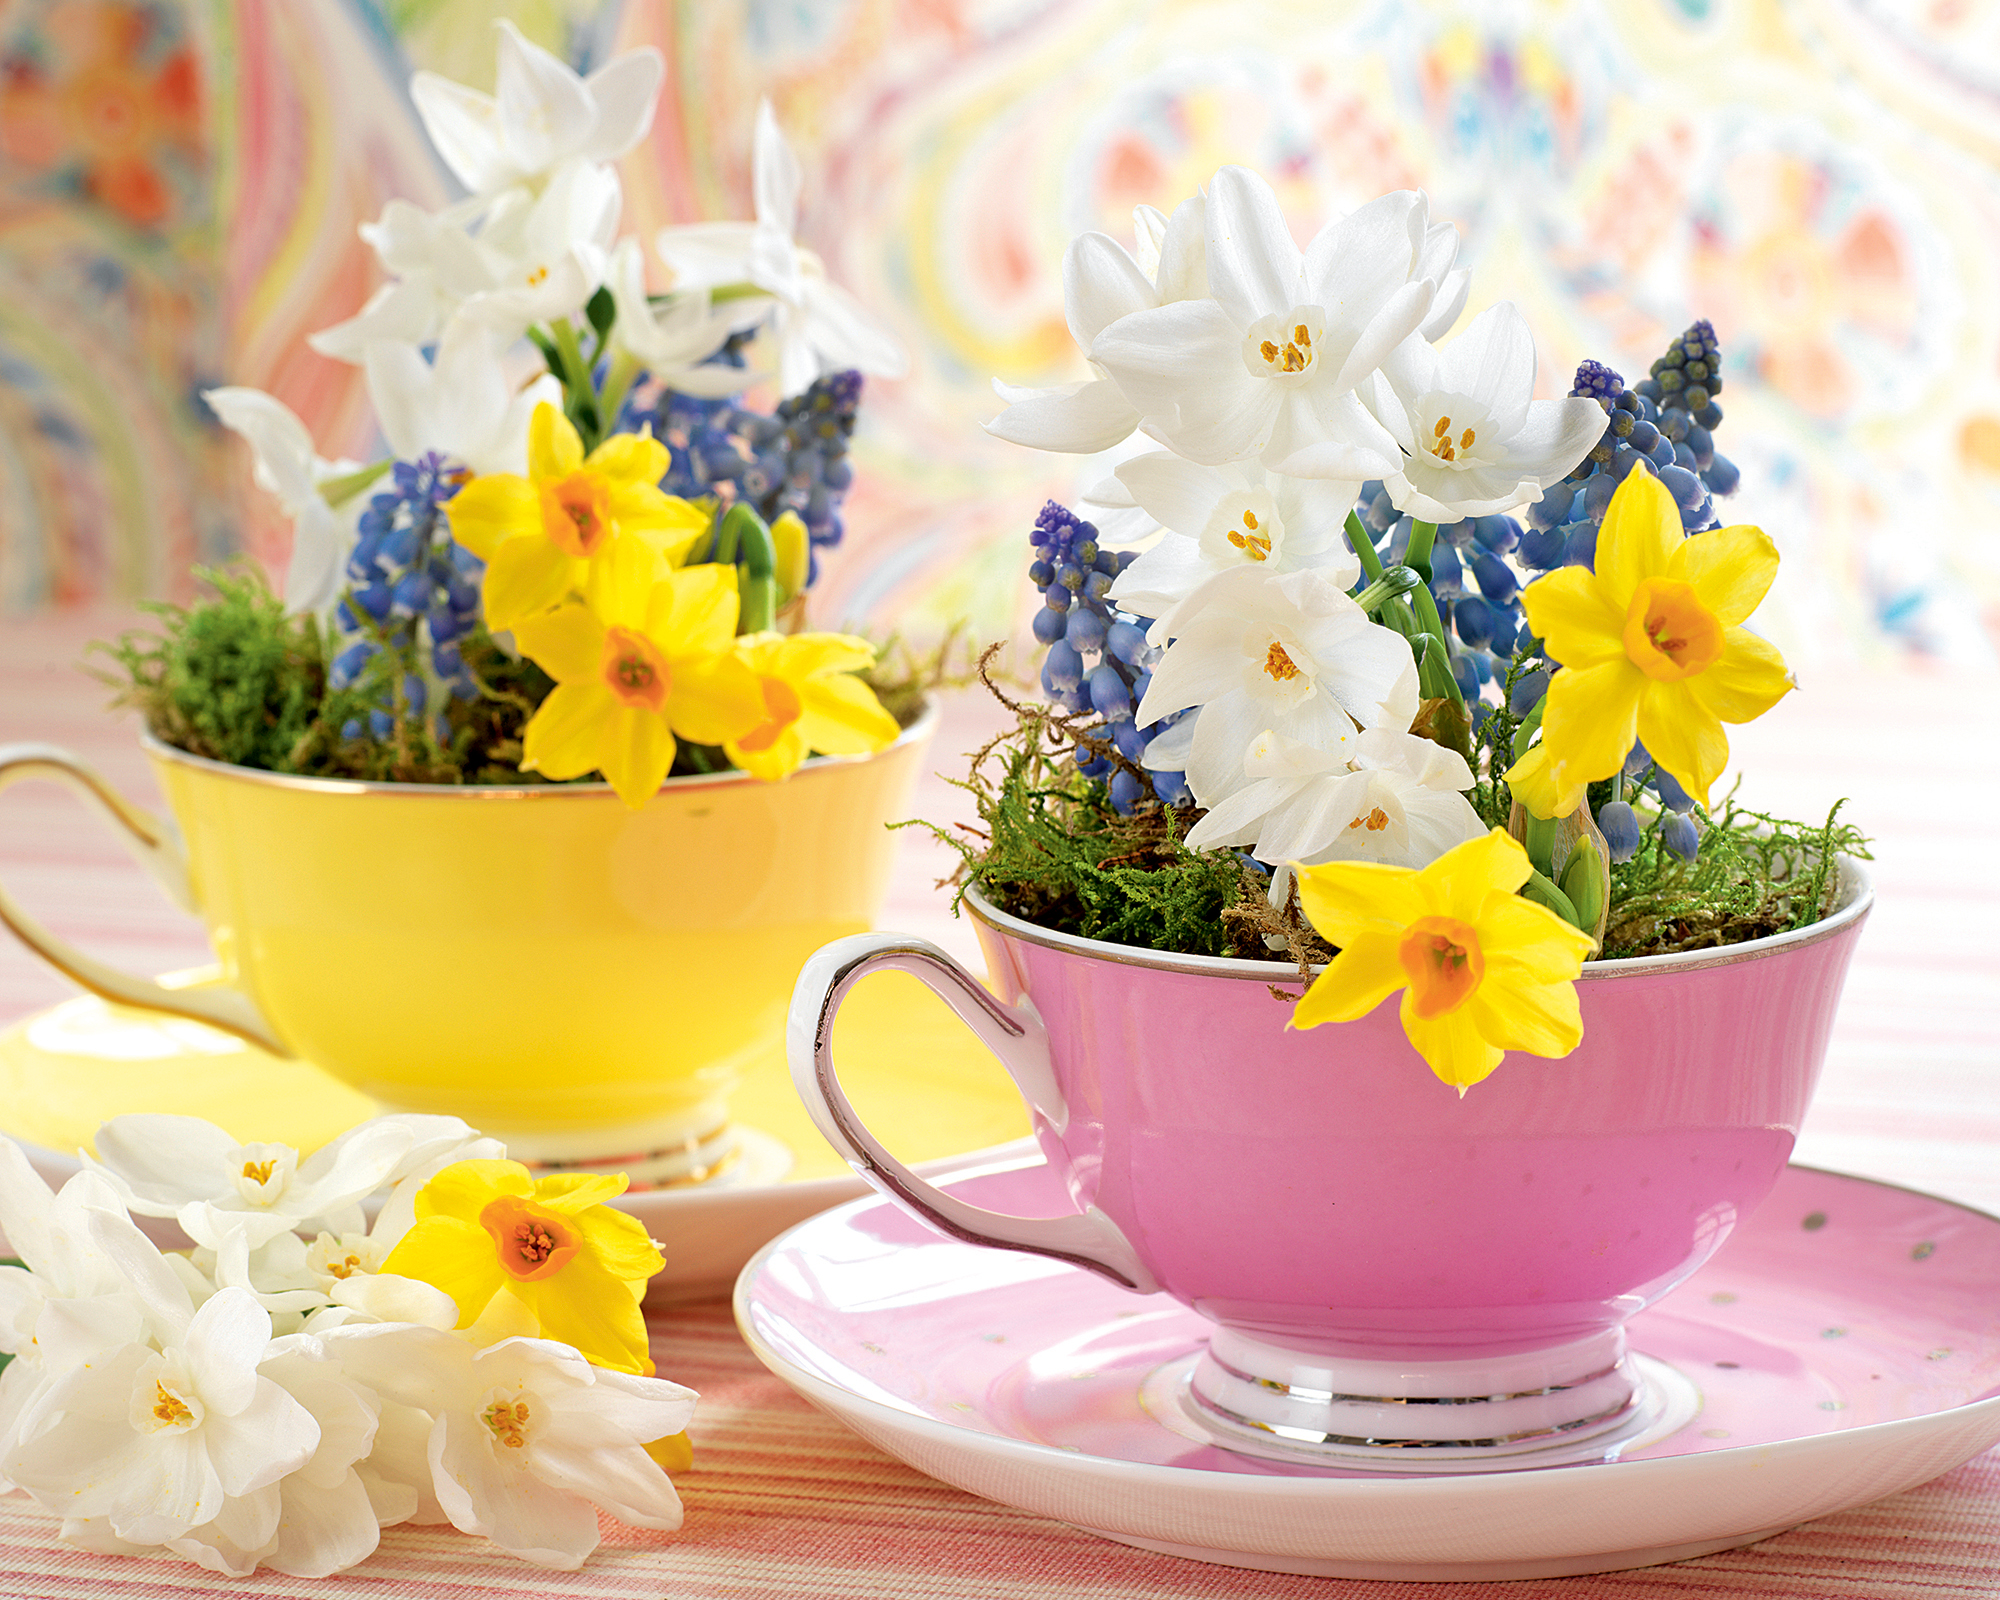 Tea cups and saucers filled with spring flowers